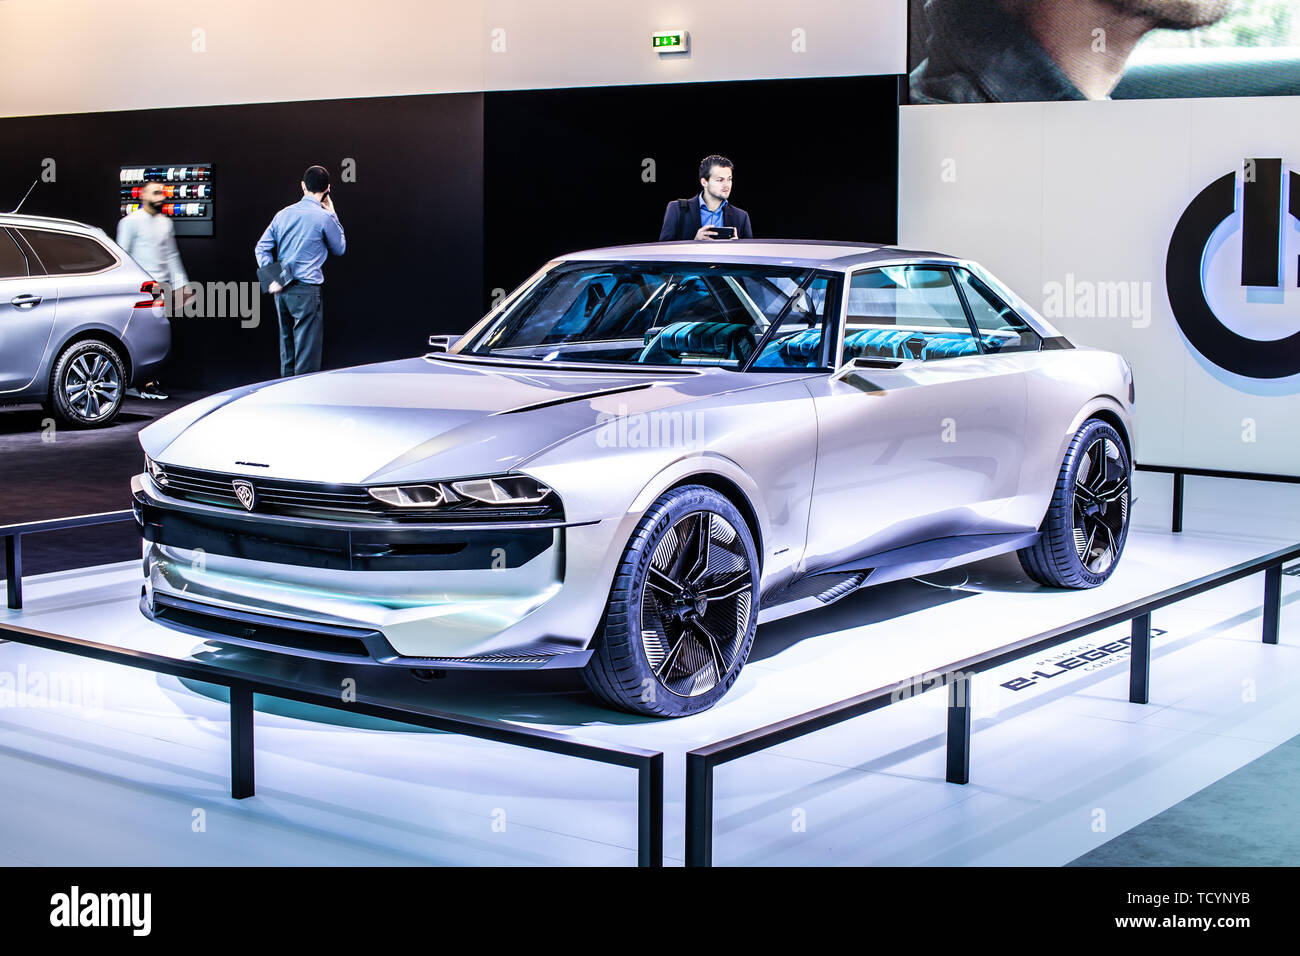 Brussels, Belgium, Jan 18, 2019 Peugeot e-Legend Concept, electric sports  car, styled on 504 coupe at Brussels Motor Show prototype created by Peugeot  Stock Photo - Alamy